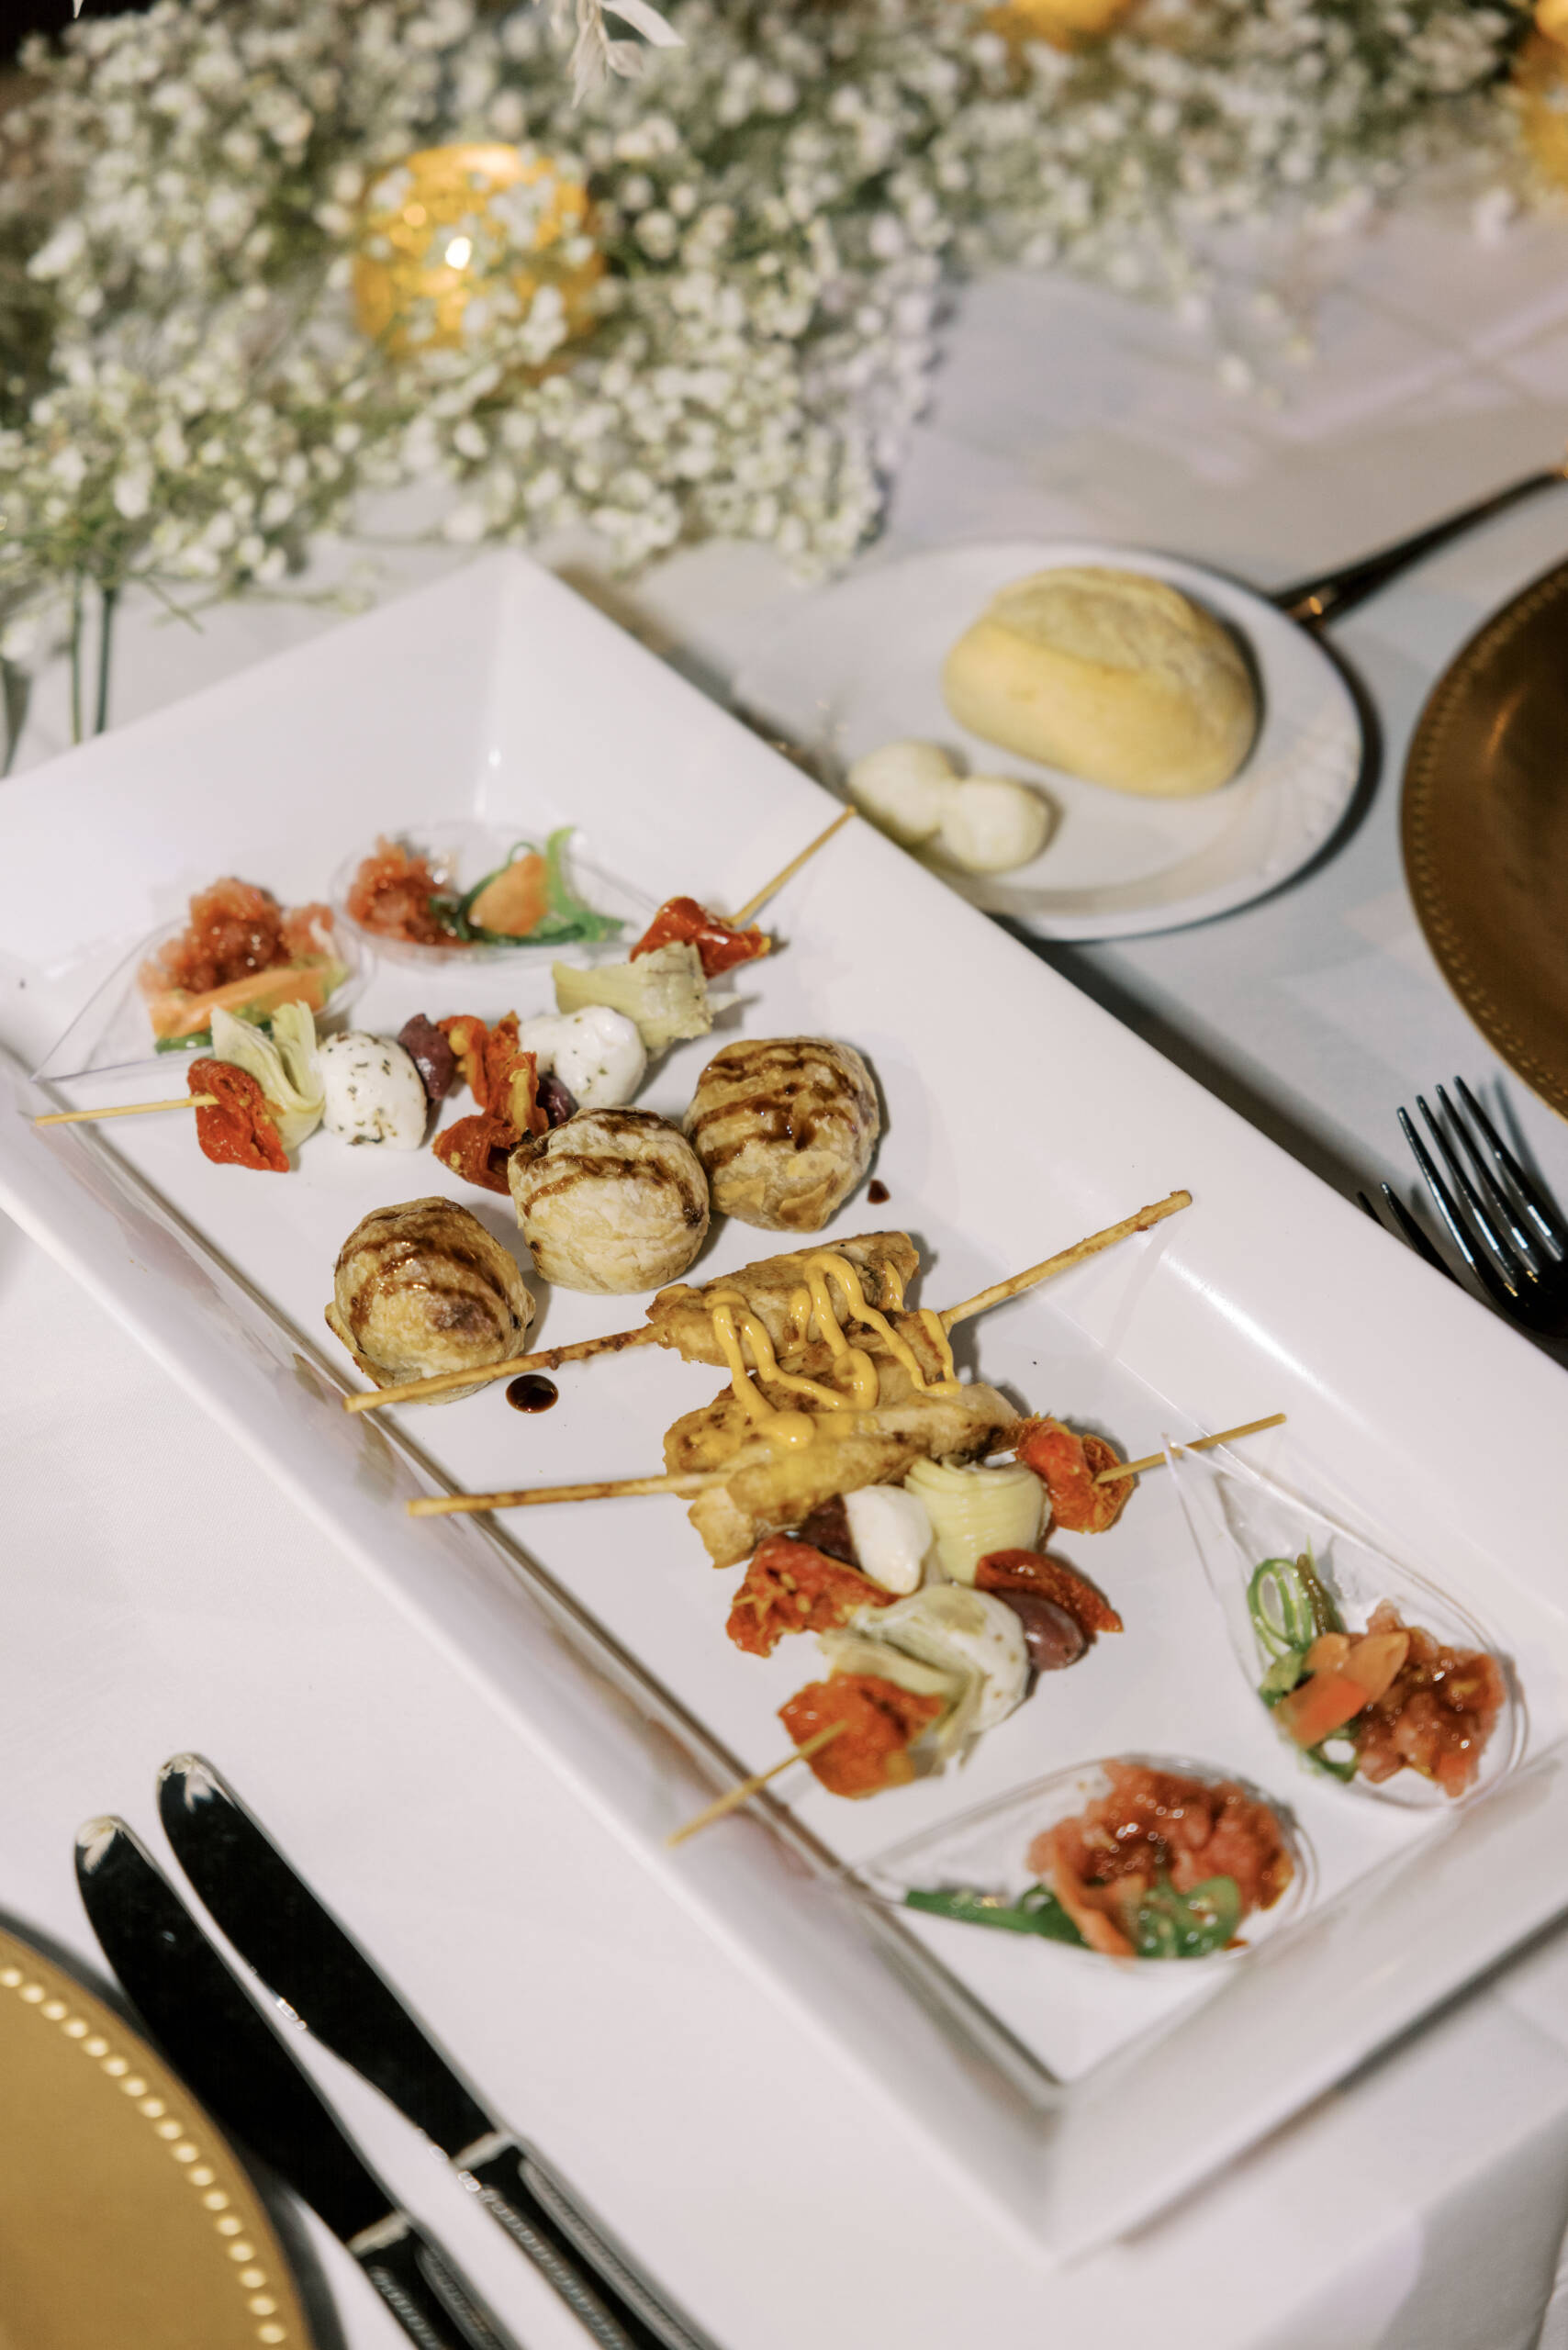 The Most Fundamental Wedding Menu Advice: How to Delight Your Guests with Delicious Food